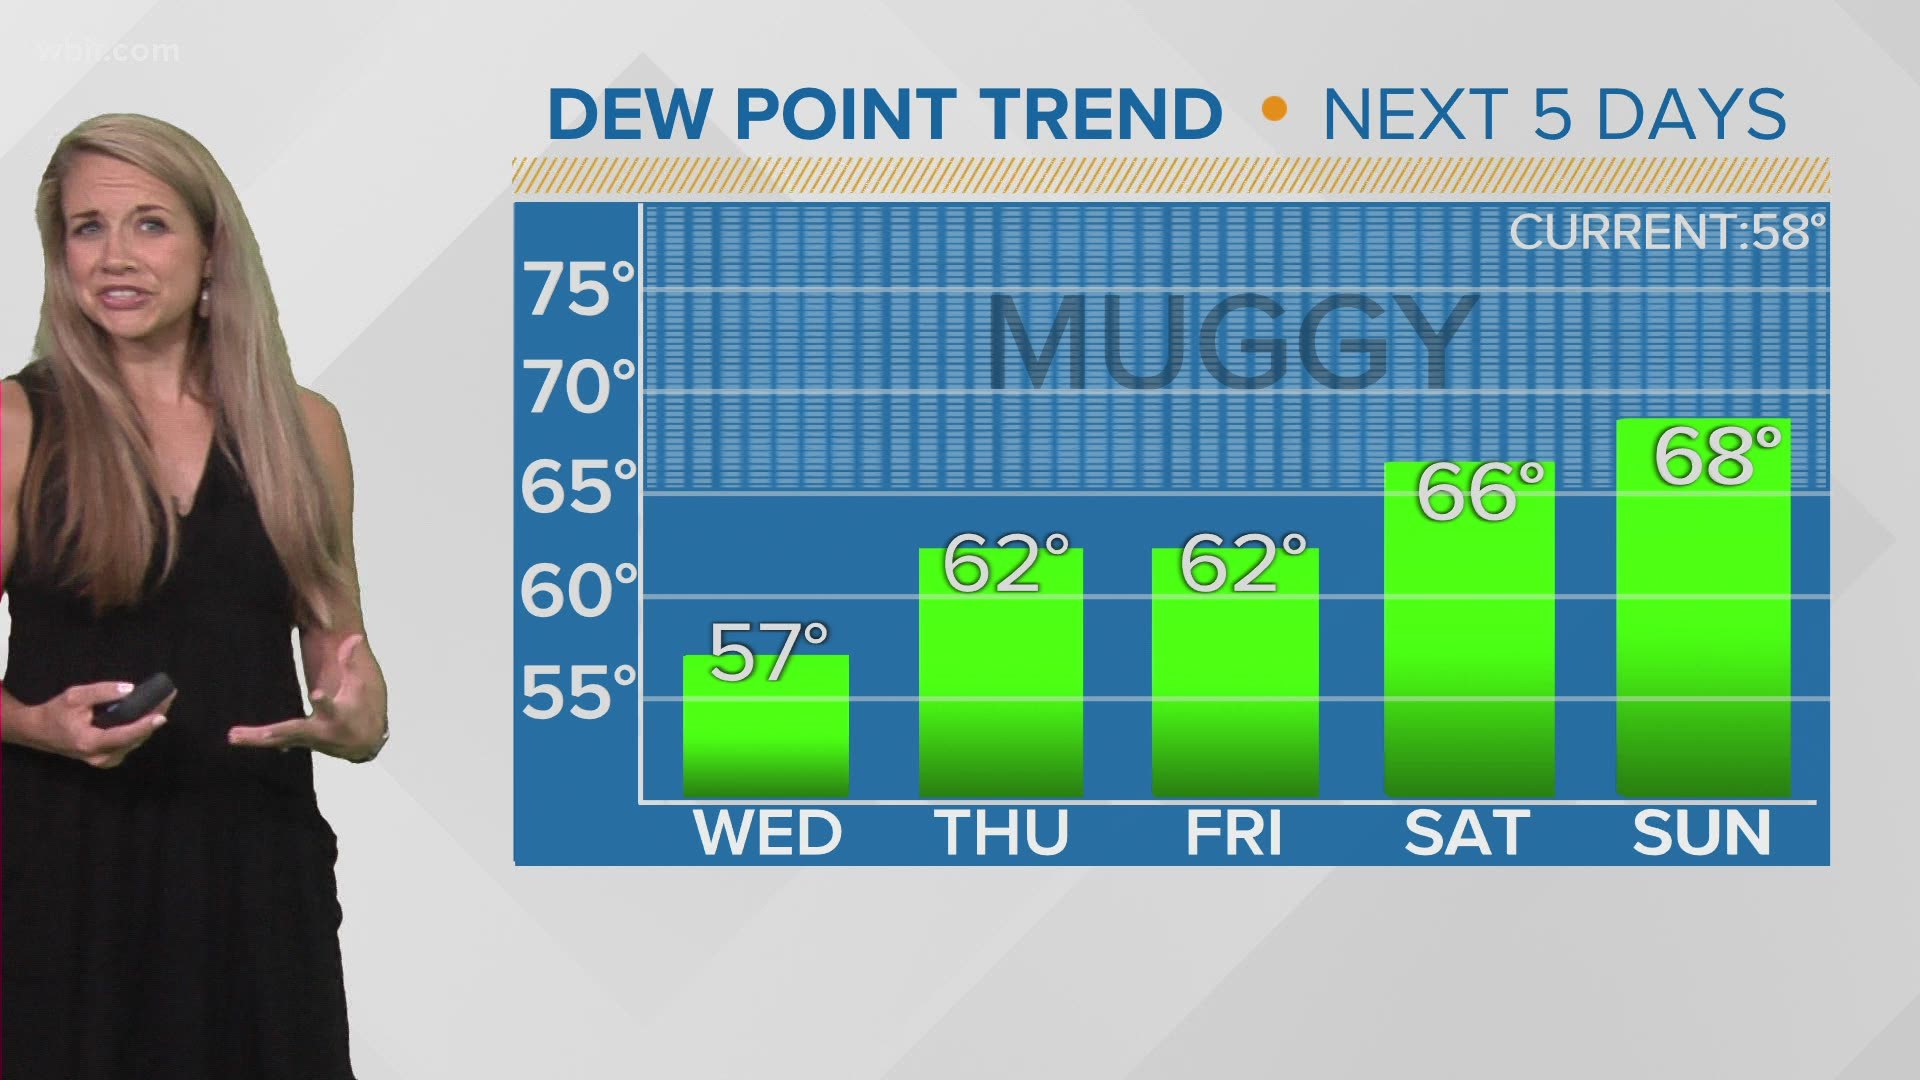 Humidity and rain chances increase into the weekend.